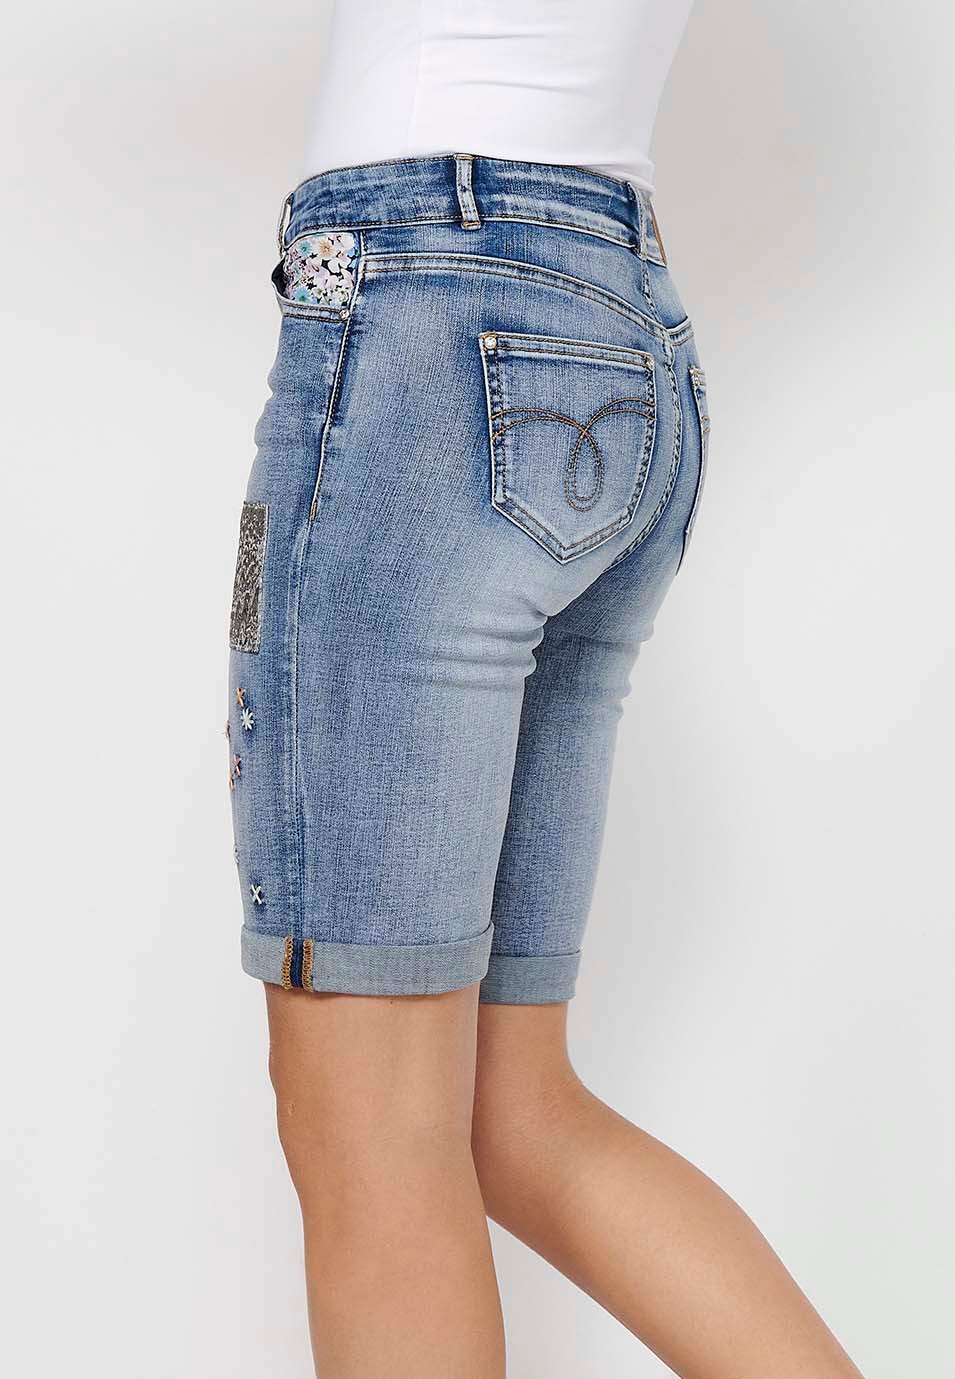 Short shorts finished in turn with details of front patches and removable chain decoration with front closure with zipper and button in Blue for Women 9